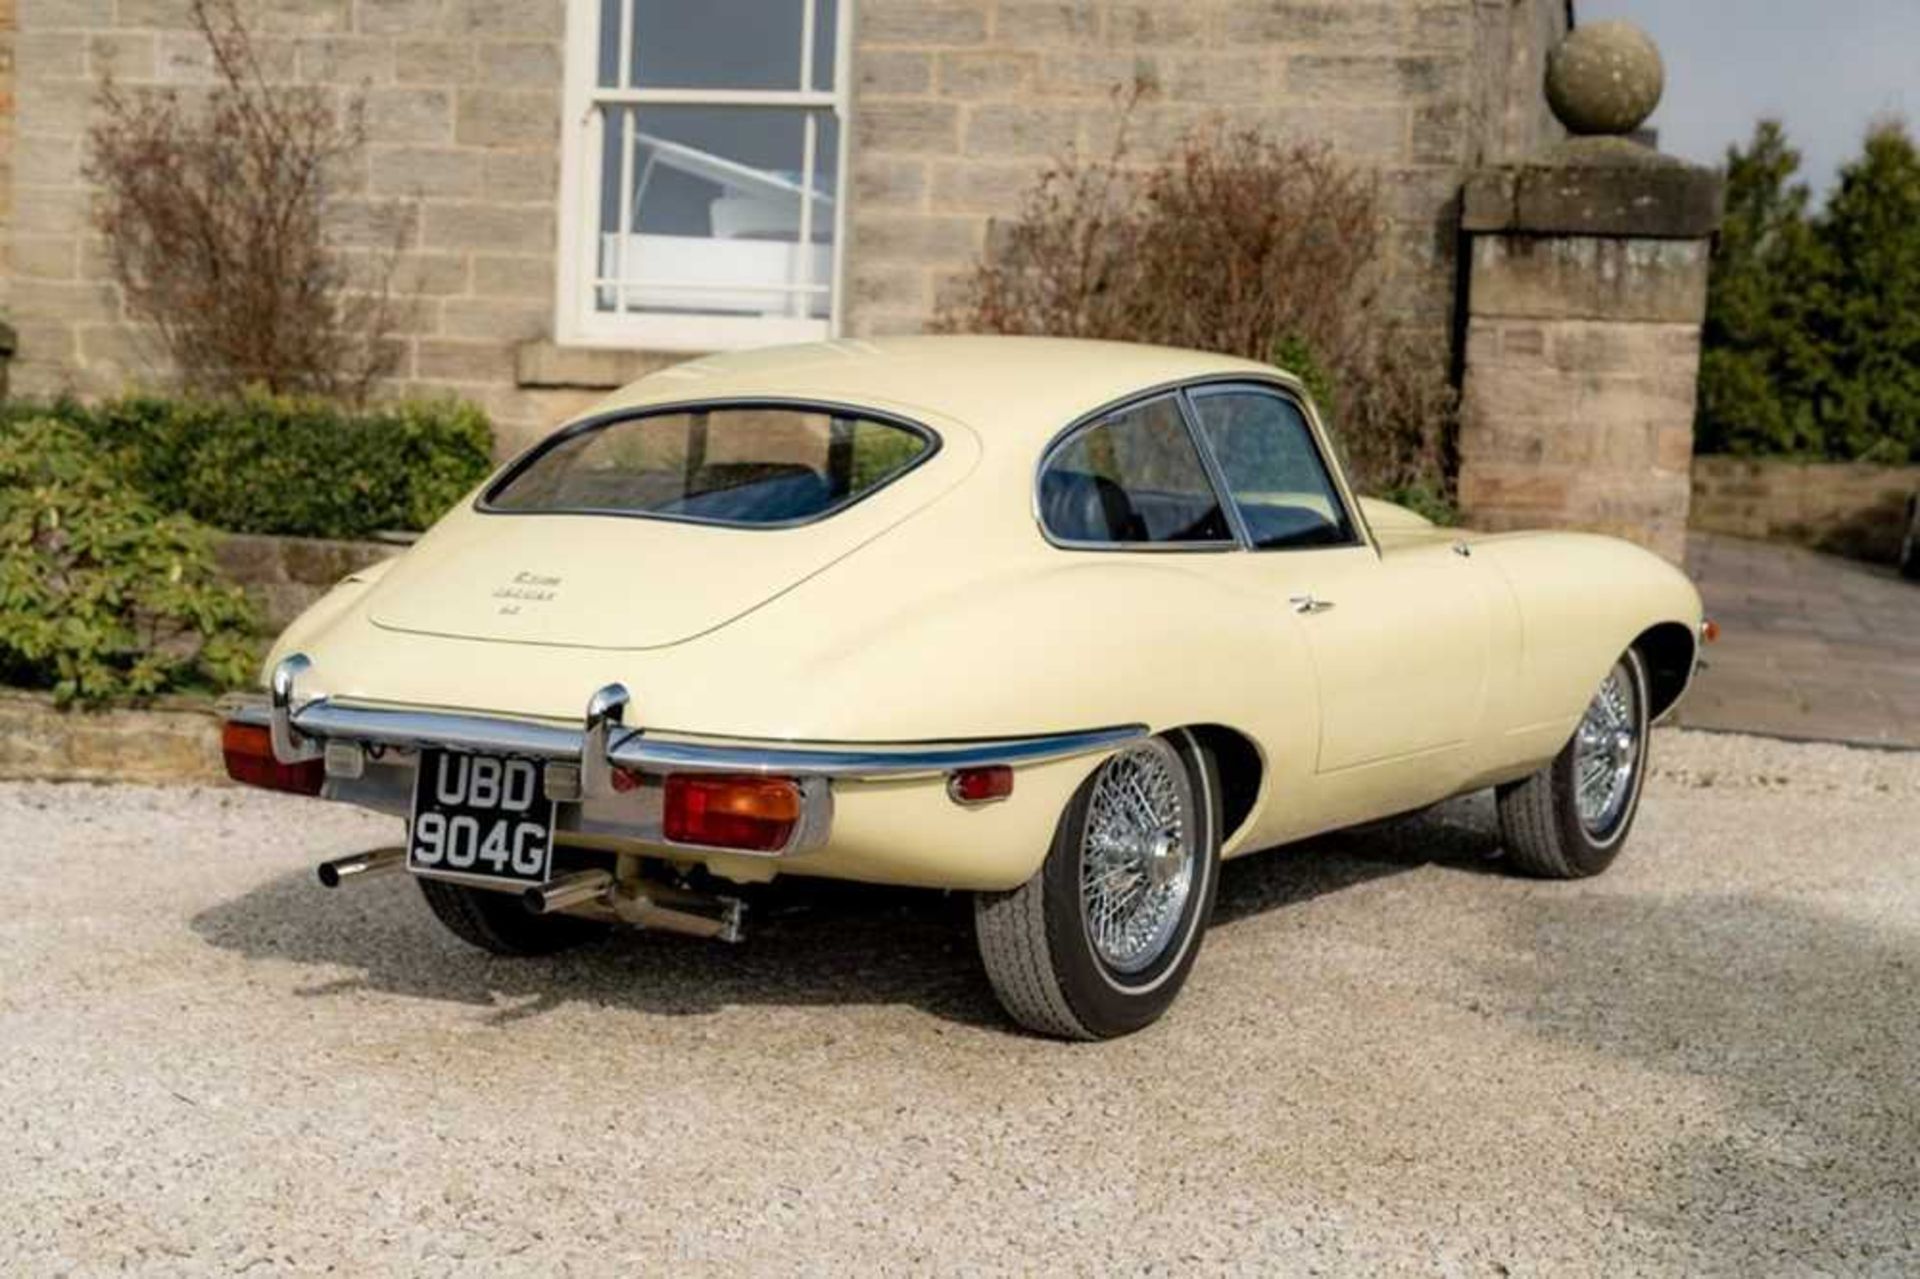 1968 Jaguar E-Type 4.2 Litre Coupe Genuine 44,000 miles from new - Image 16 of 68